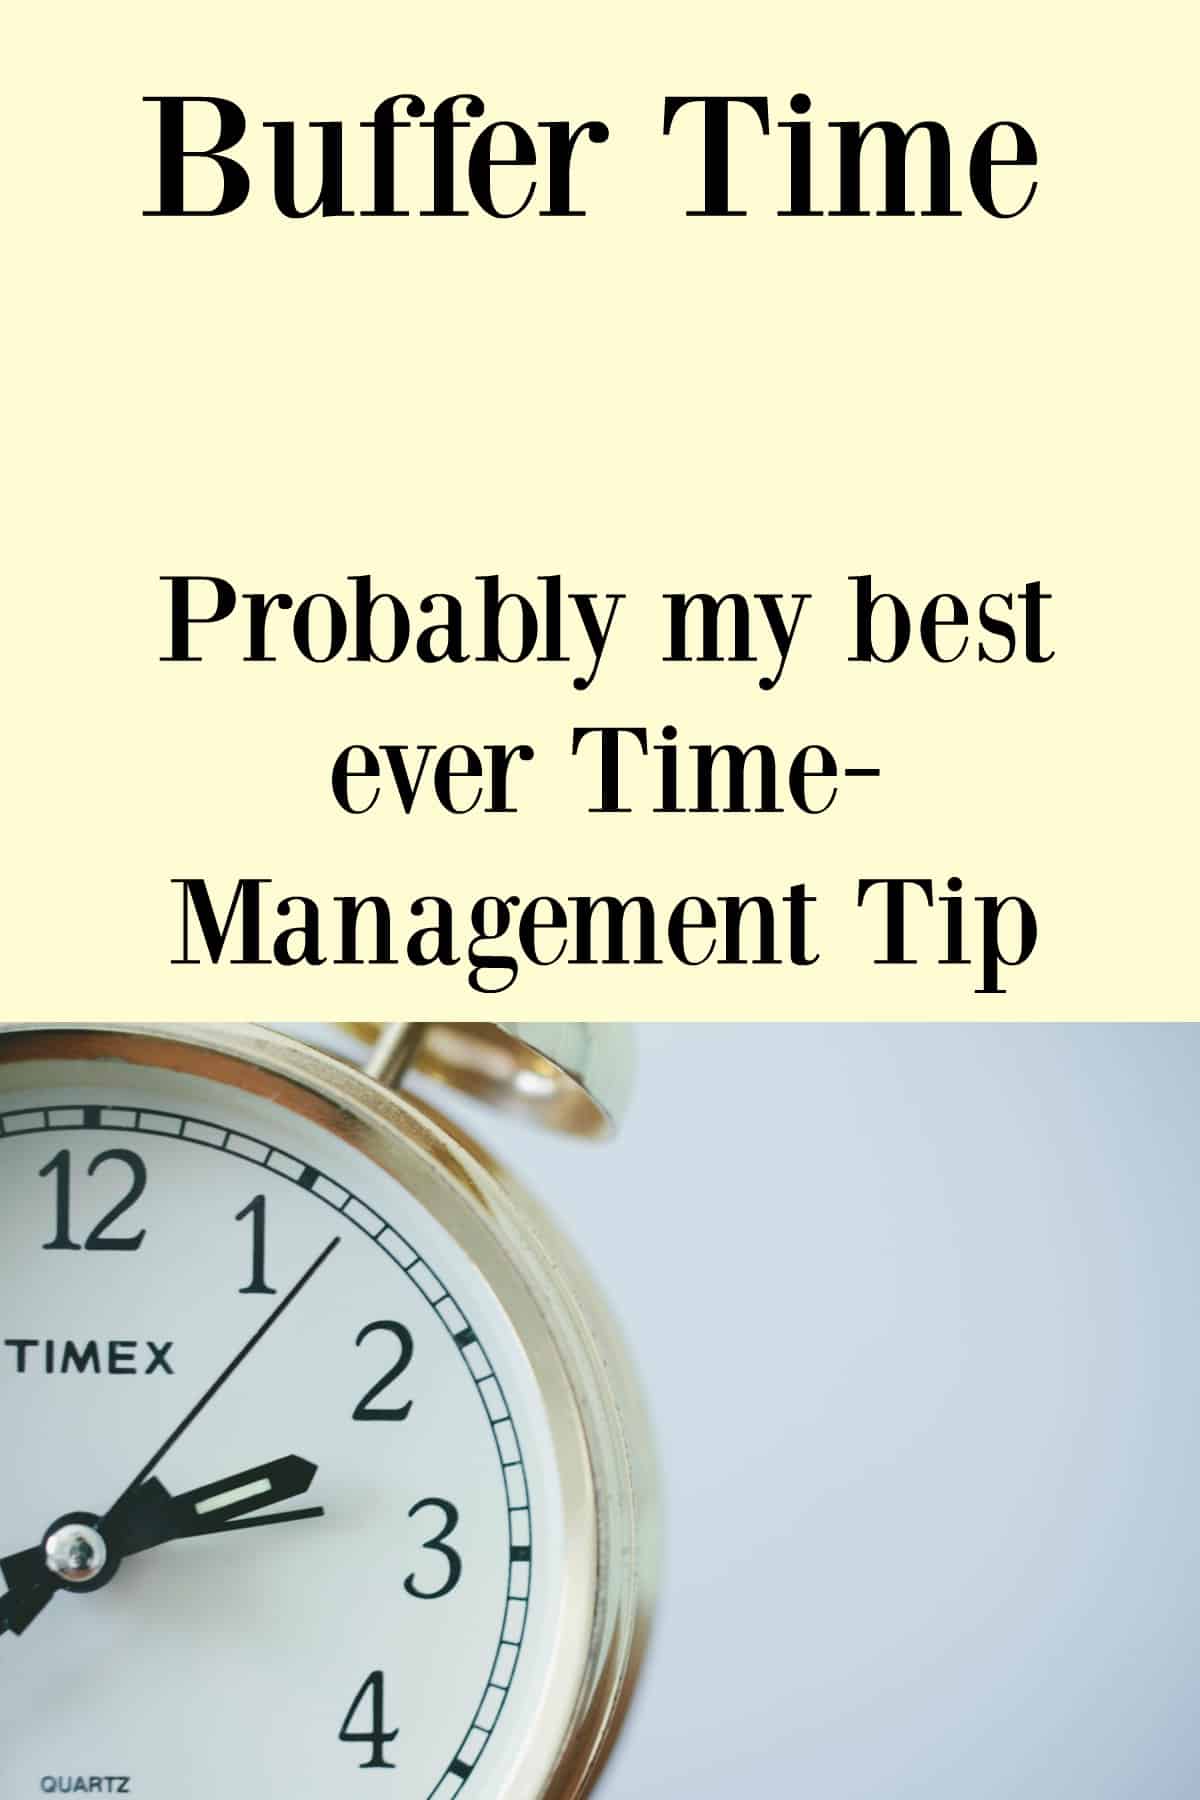 This is probably my best ever time-management tip in terms of keeping calm and keeping your sanity. Allow yourself some buffer time